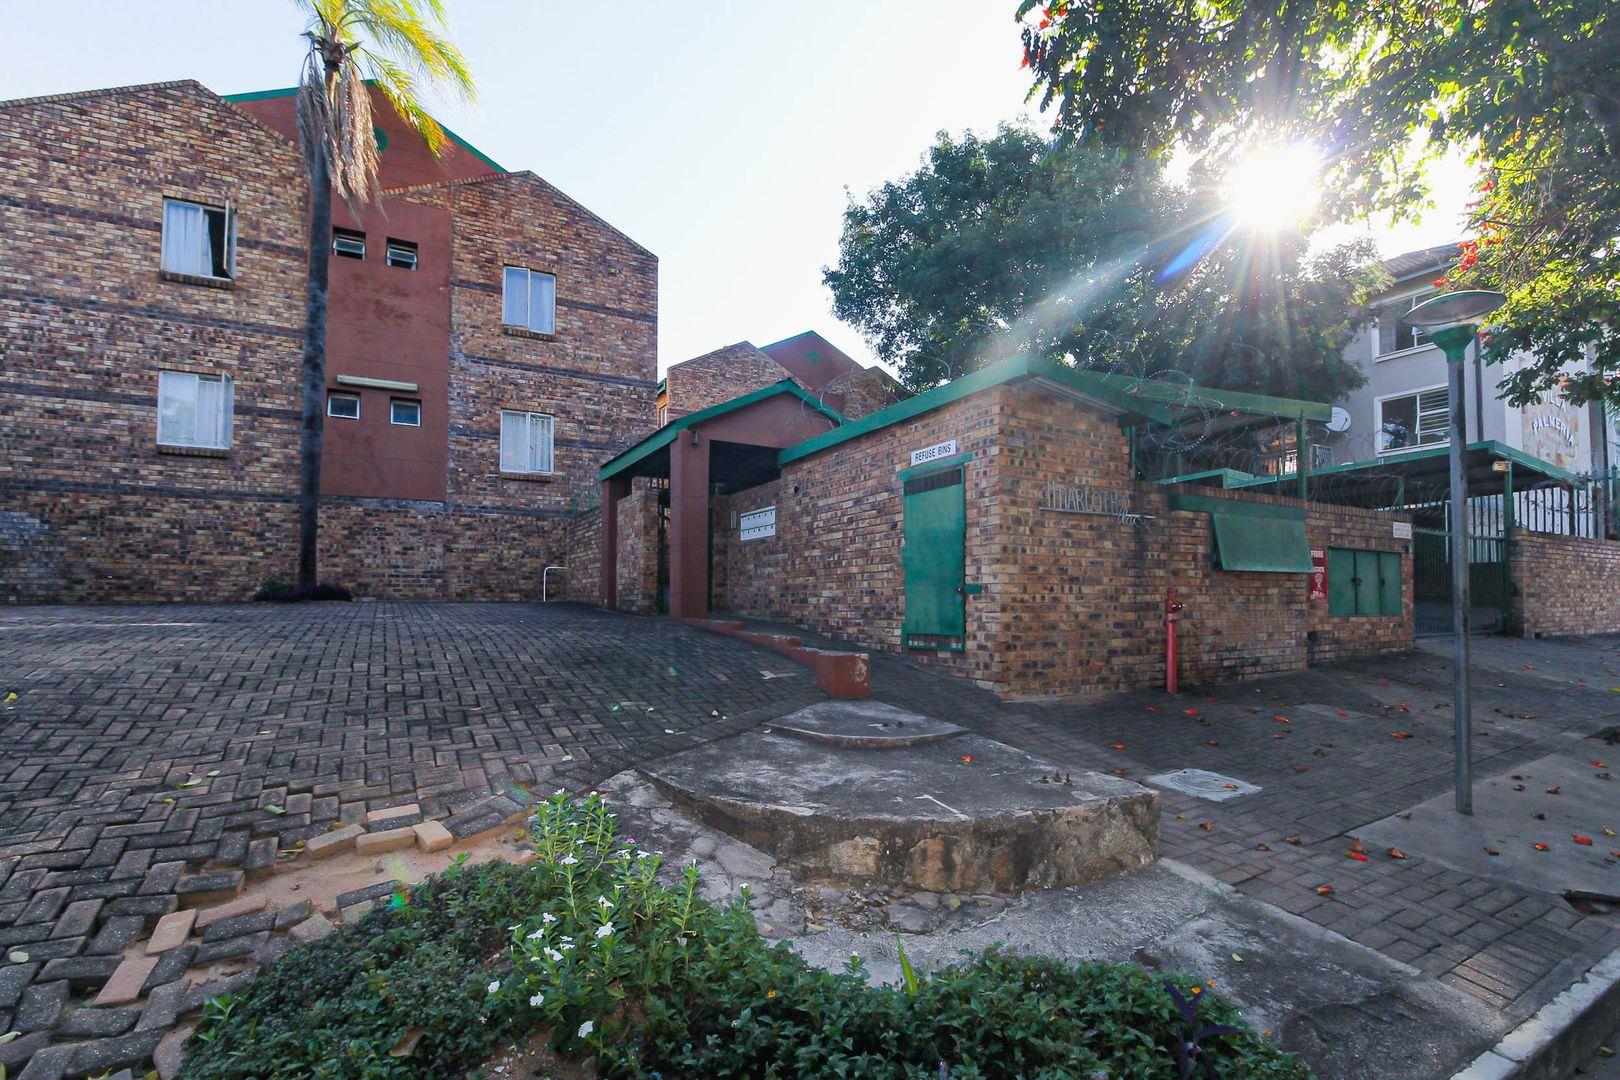 2 Bedroom Apartment / flat for sale in Nelspruit Central - 11 Marloth Street